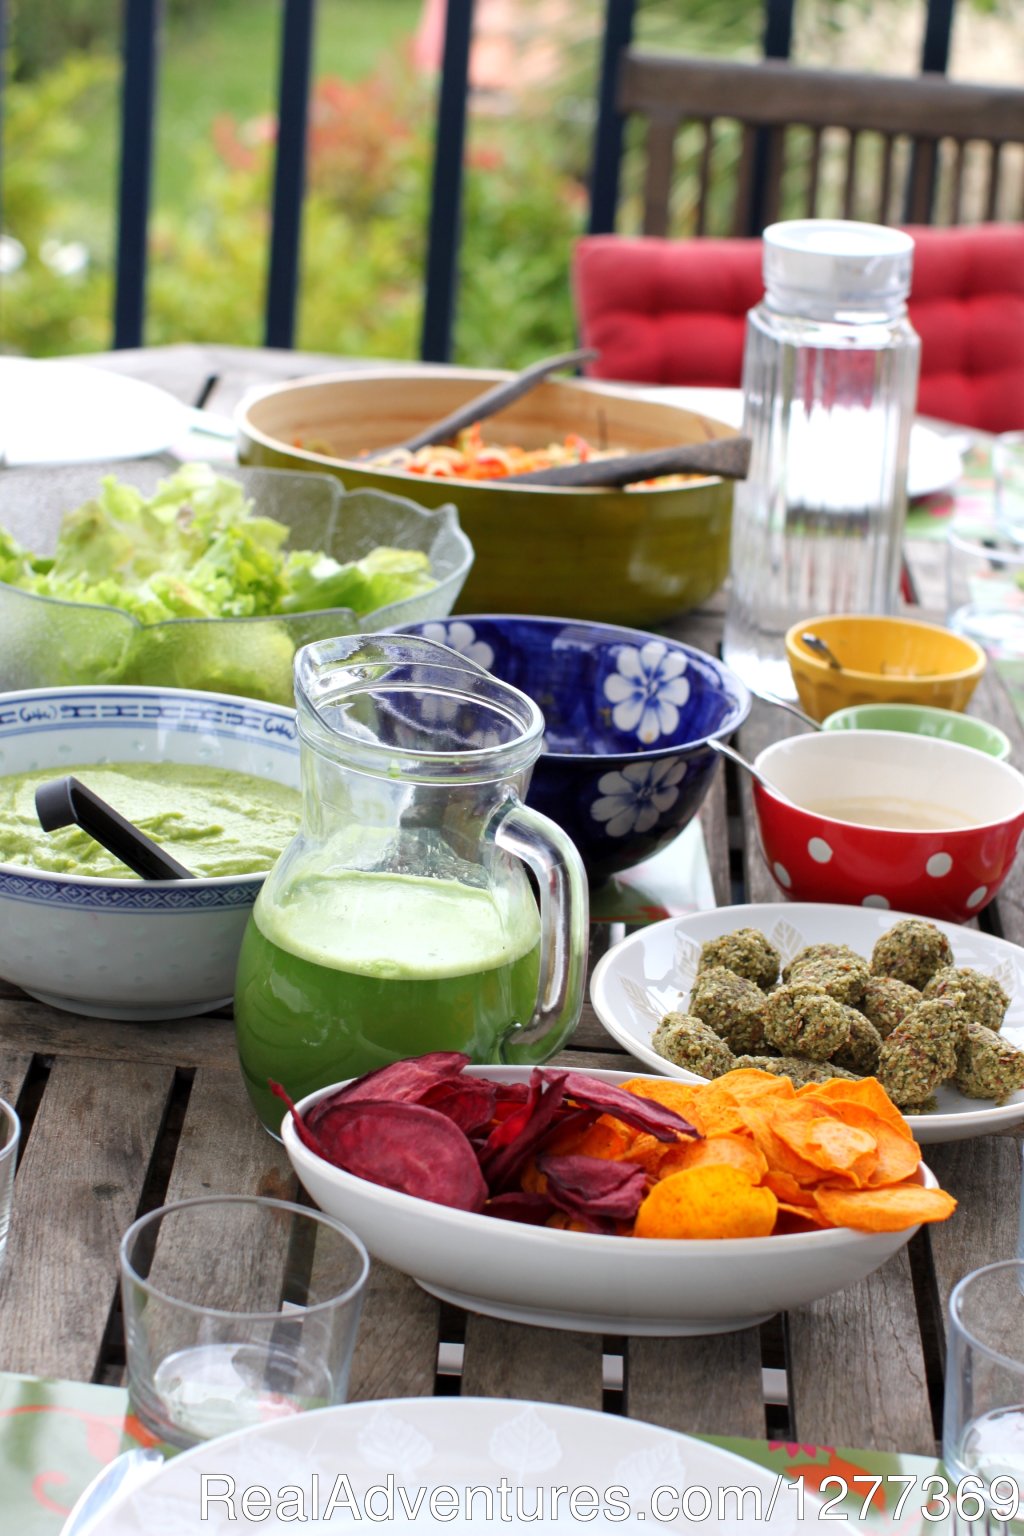 Raw gourmet meal | Yoga, Gourmet Raw food/chocolate South of France | Image #10/17 | 